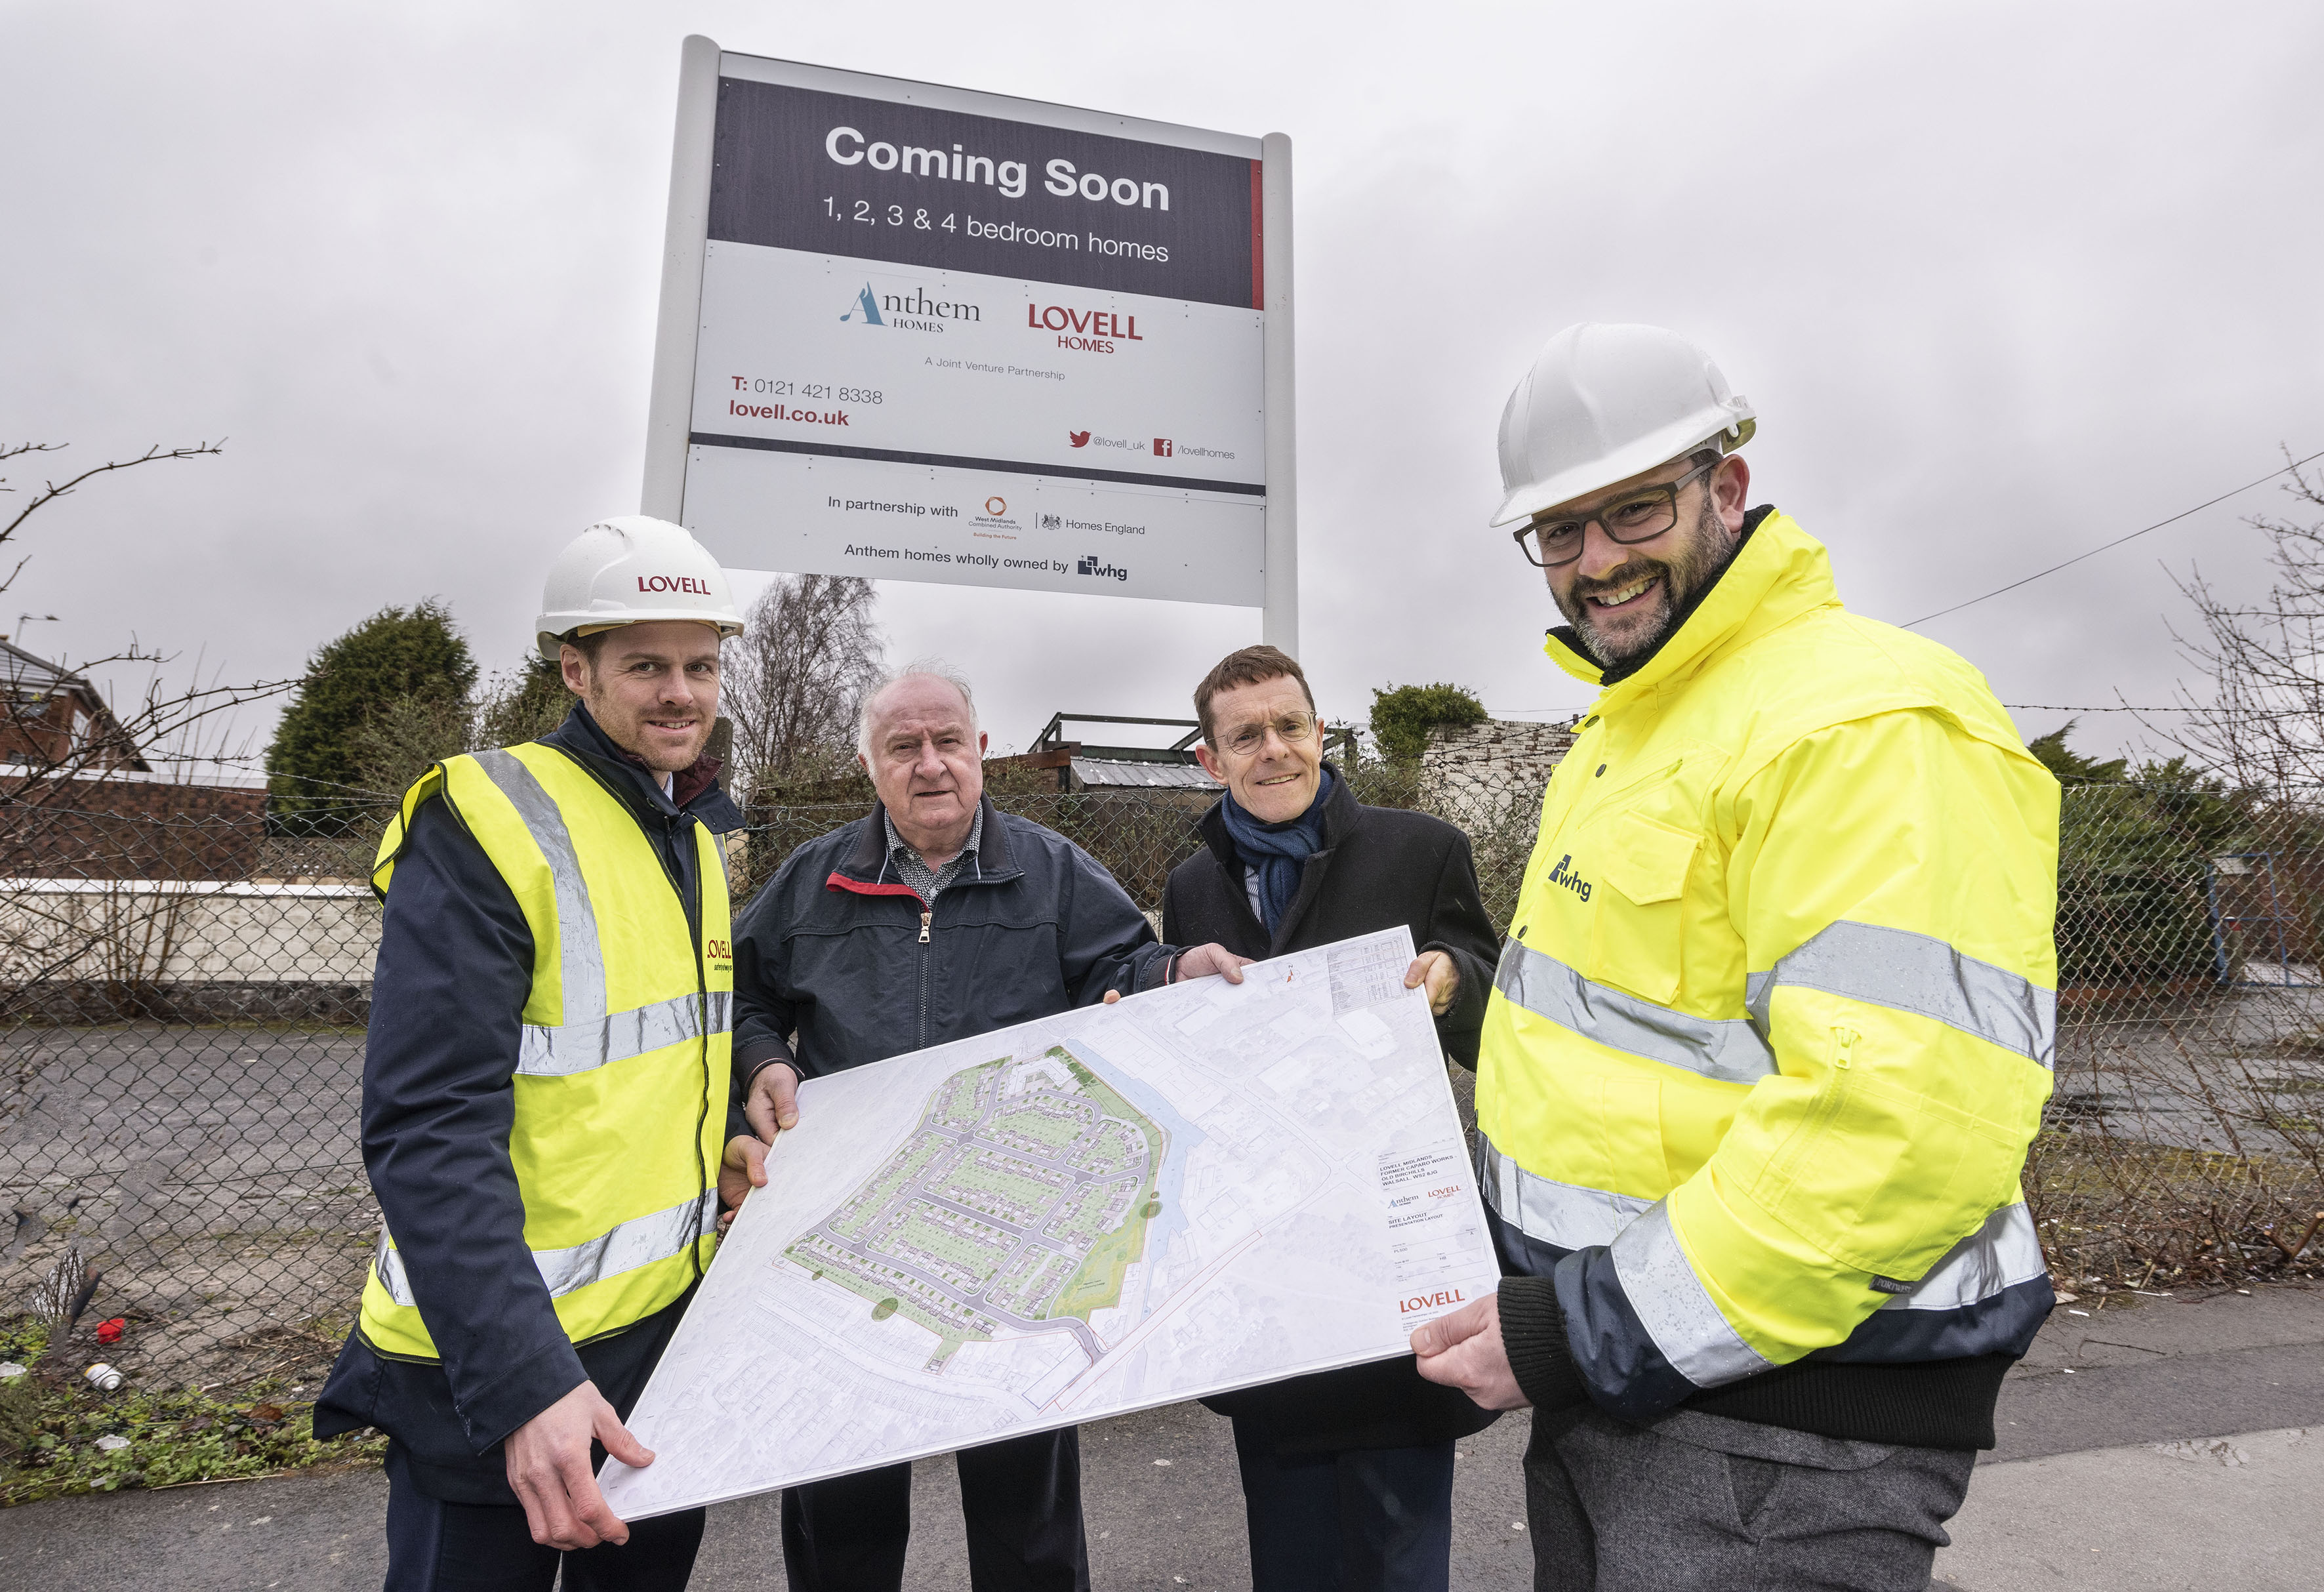 From left: Stuart Penn, regional managing director for Lovell, Cllr Mike Bird, leader of Walsall Council and WMCA portfolio holder for housing, Mayor of the West Midlands Andy Street and Duncan Smith, commercial director of whg